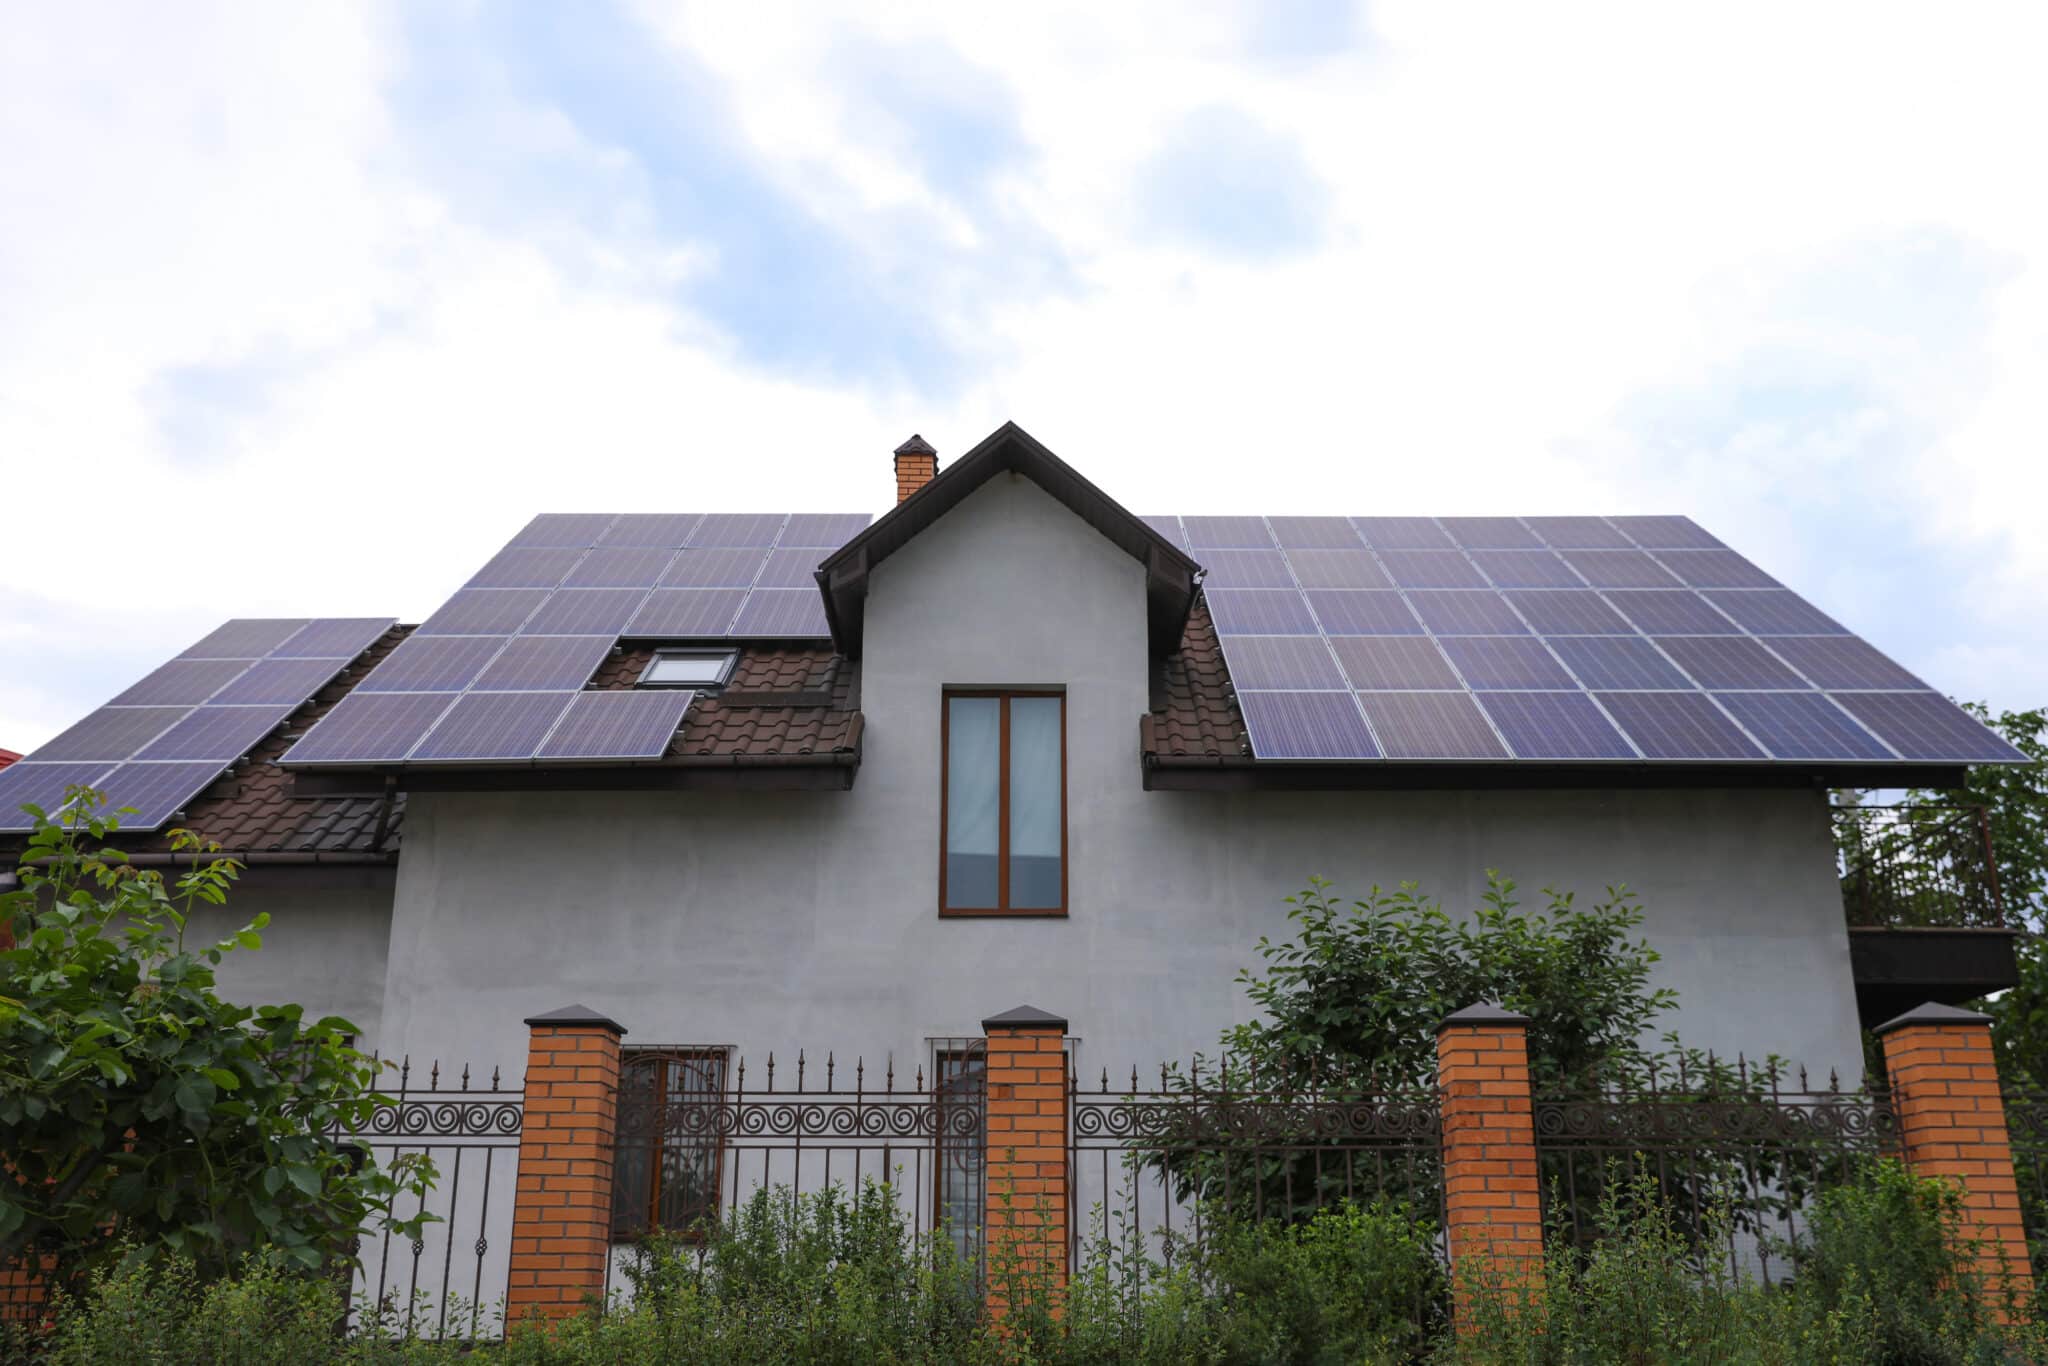 House with installed solar panels on roof. Alternative energy source